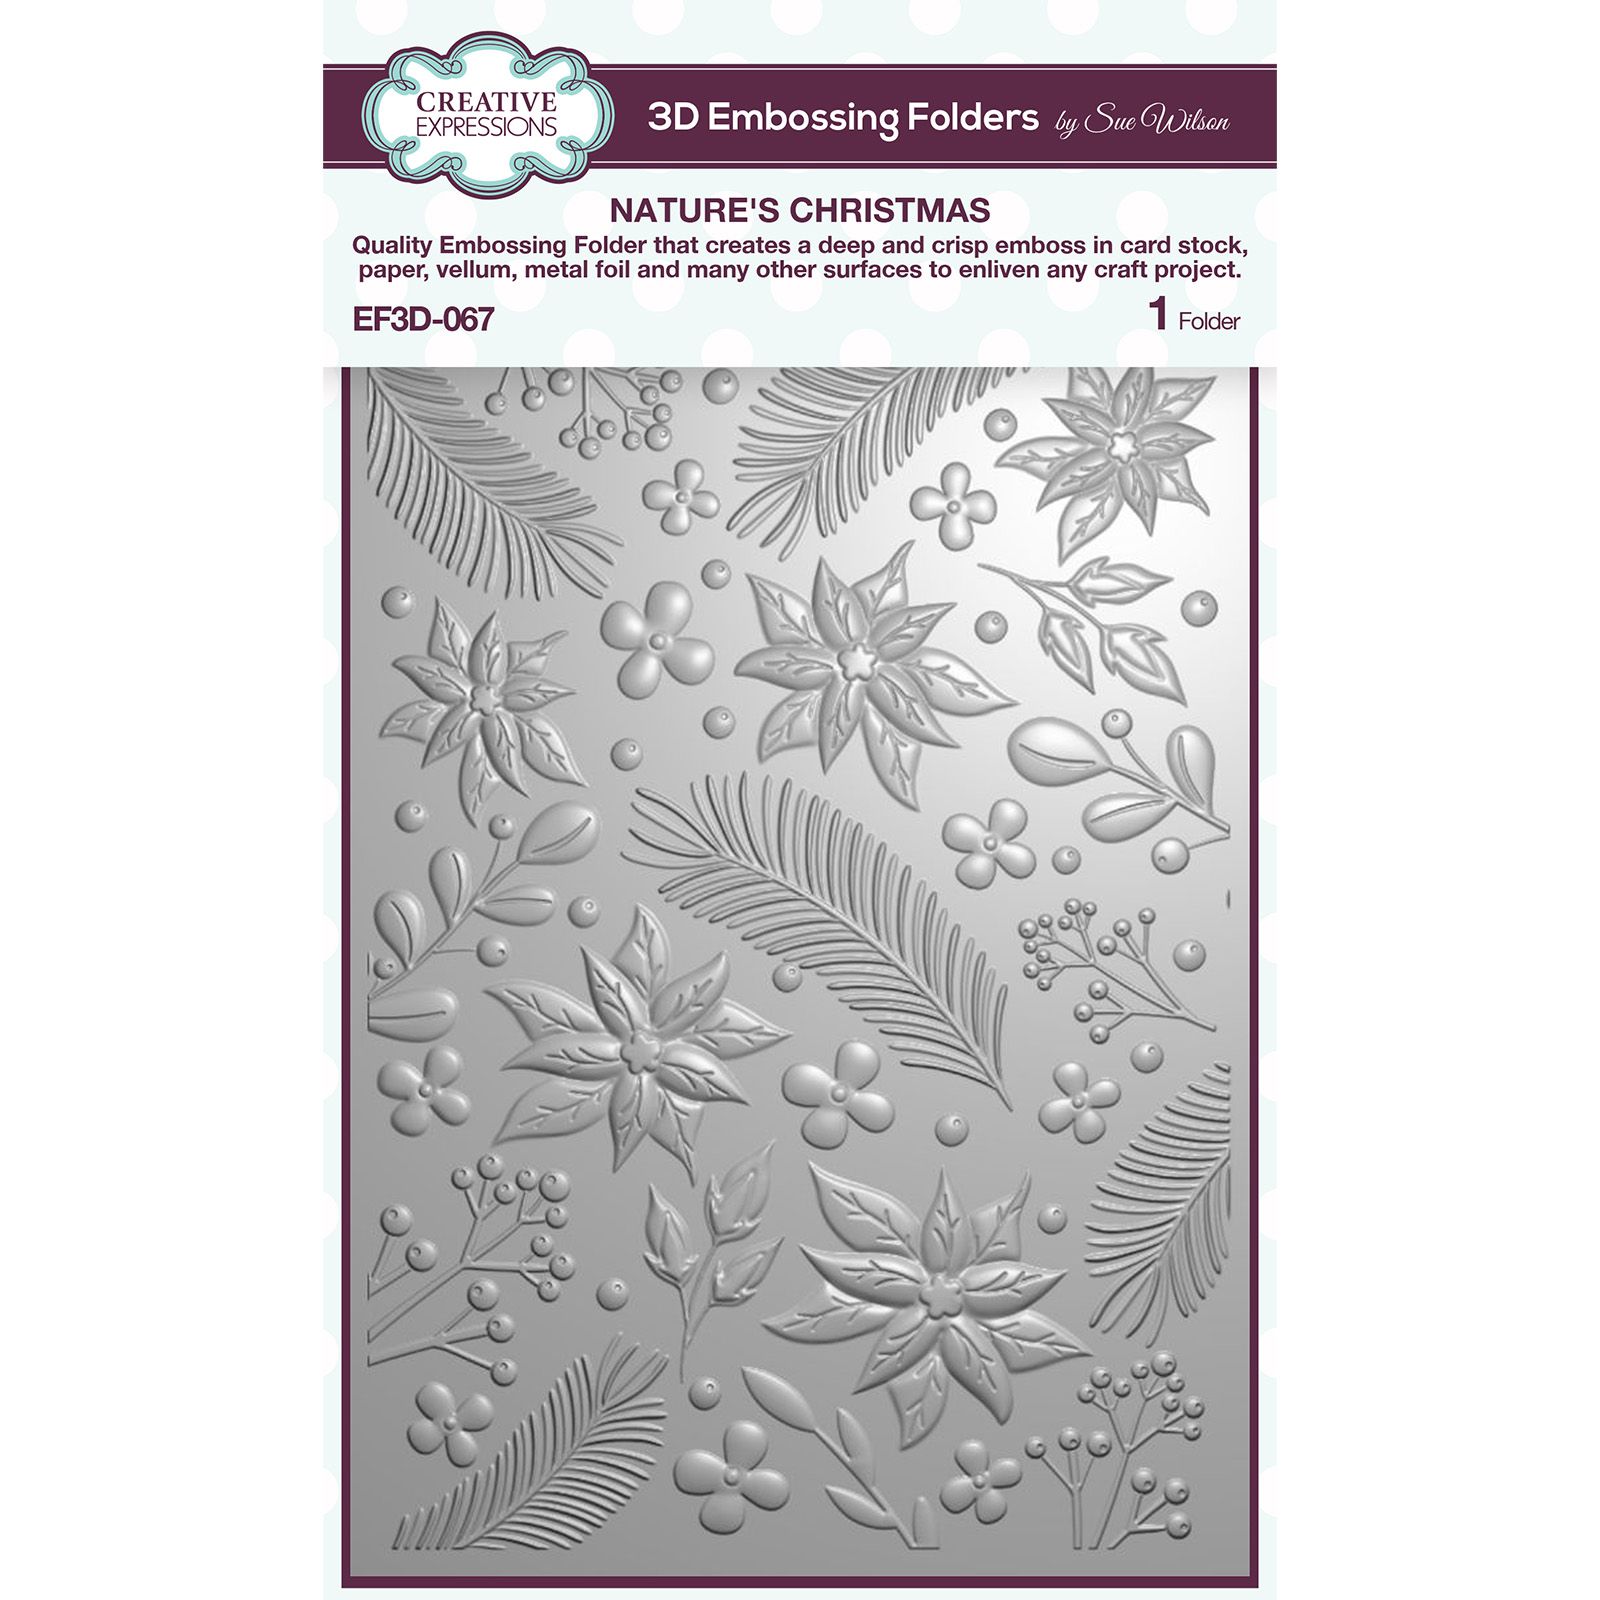 Creative Expressions • 3D Embossing Folder Nature's Christmas